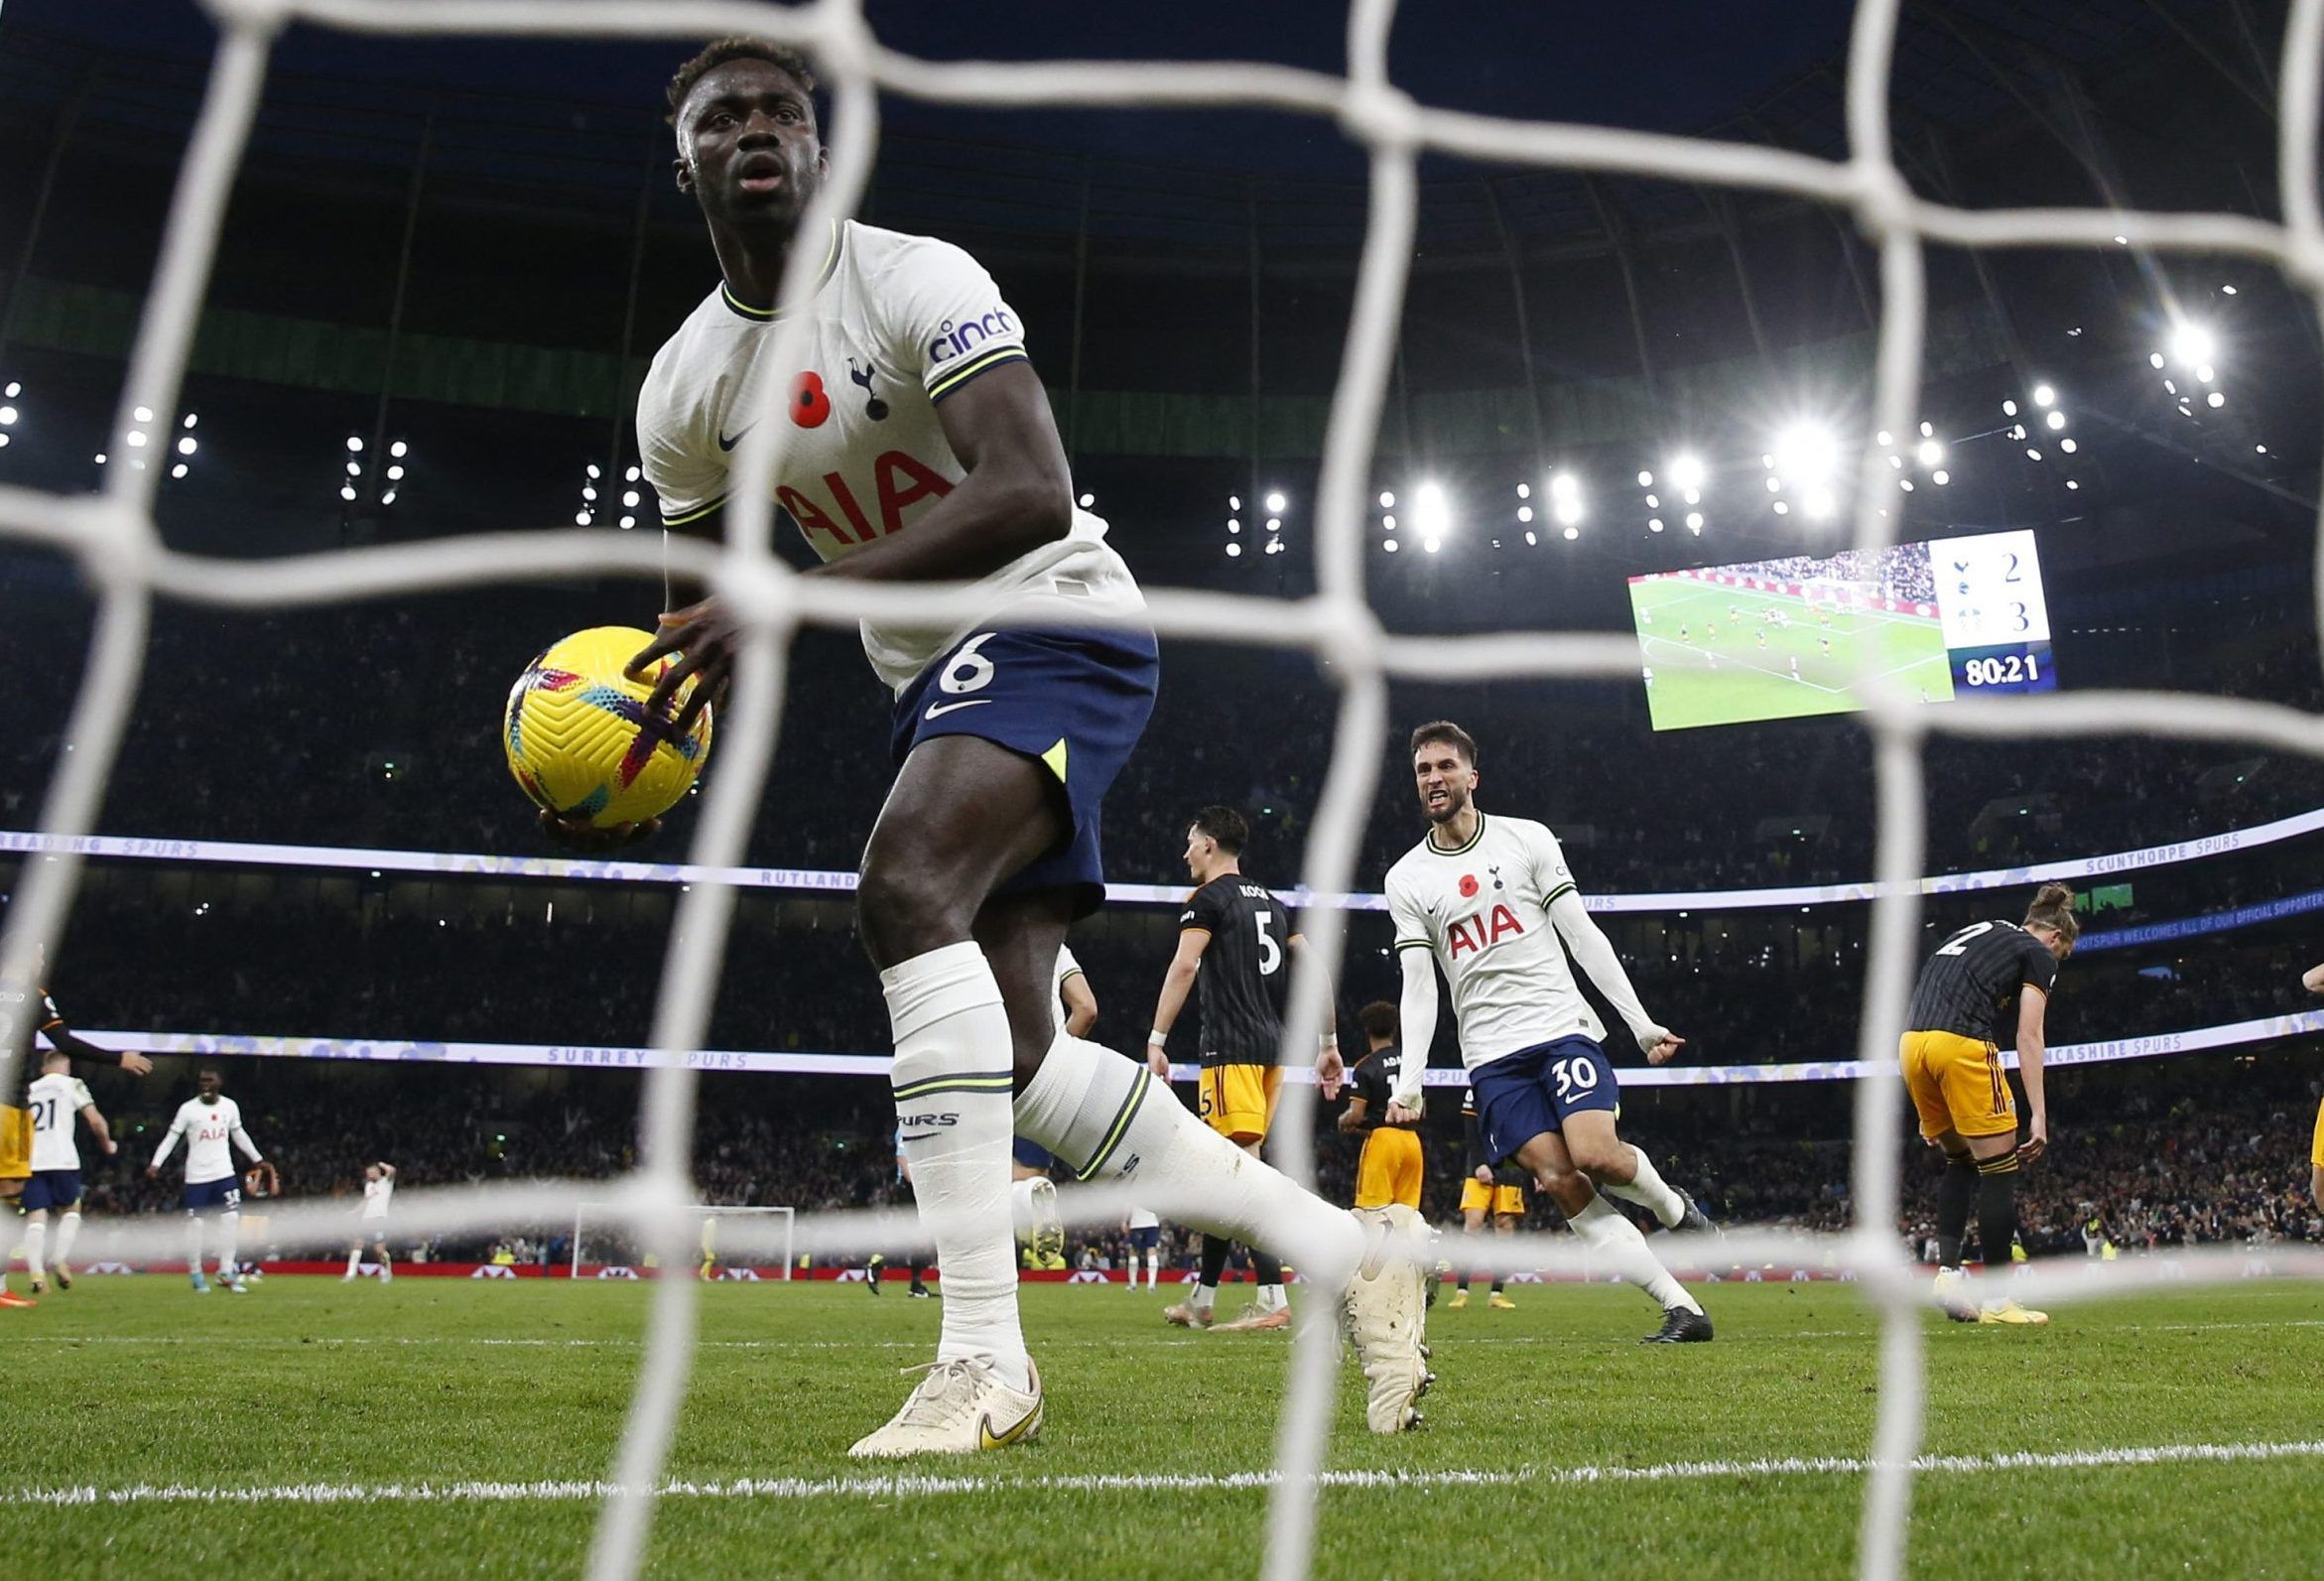 Soccer Football - Premier League - Tottenham Hotspur v Leeds United - Tottenham Hotspur Stadium, London, Britain - November 12, 2022  Tottenham Hotspur's Davinson Sanchez and Rodrigo Bentancur celebrate their third goal Action Images via Reuters/Paul Childs EDITORIAL USE ONLY. No use with unauthorized audio, video, data, fixture lists, club/league logos or 'live' services. Online in-match use limited to 75 images, no video emulation. No use in betting, games or single club /league/player publica